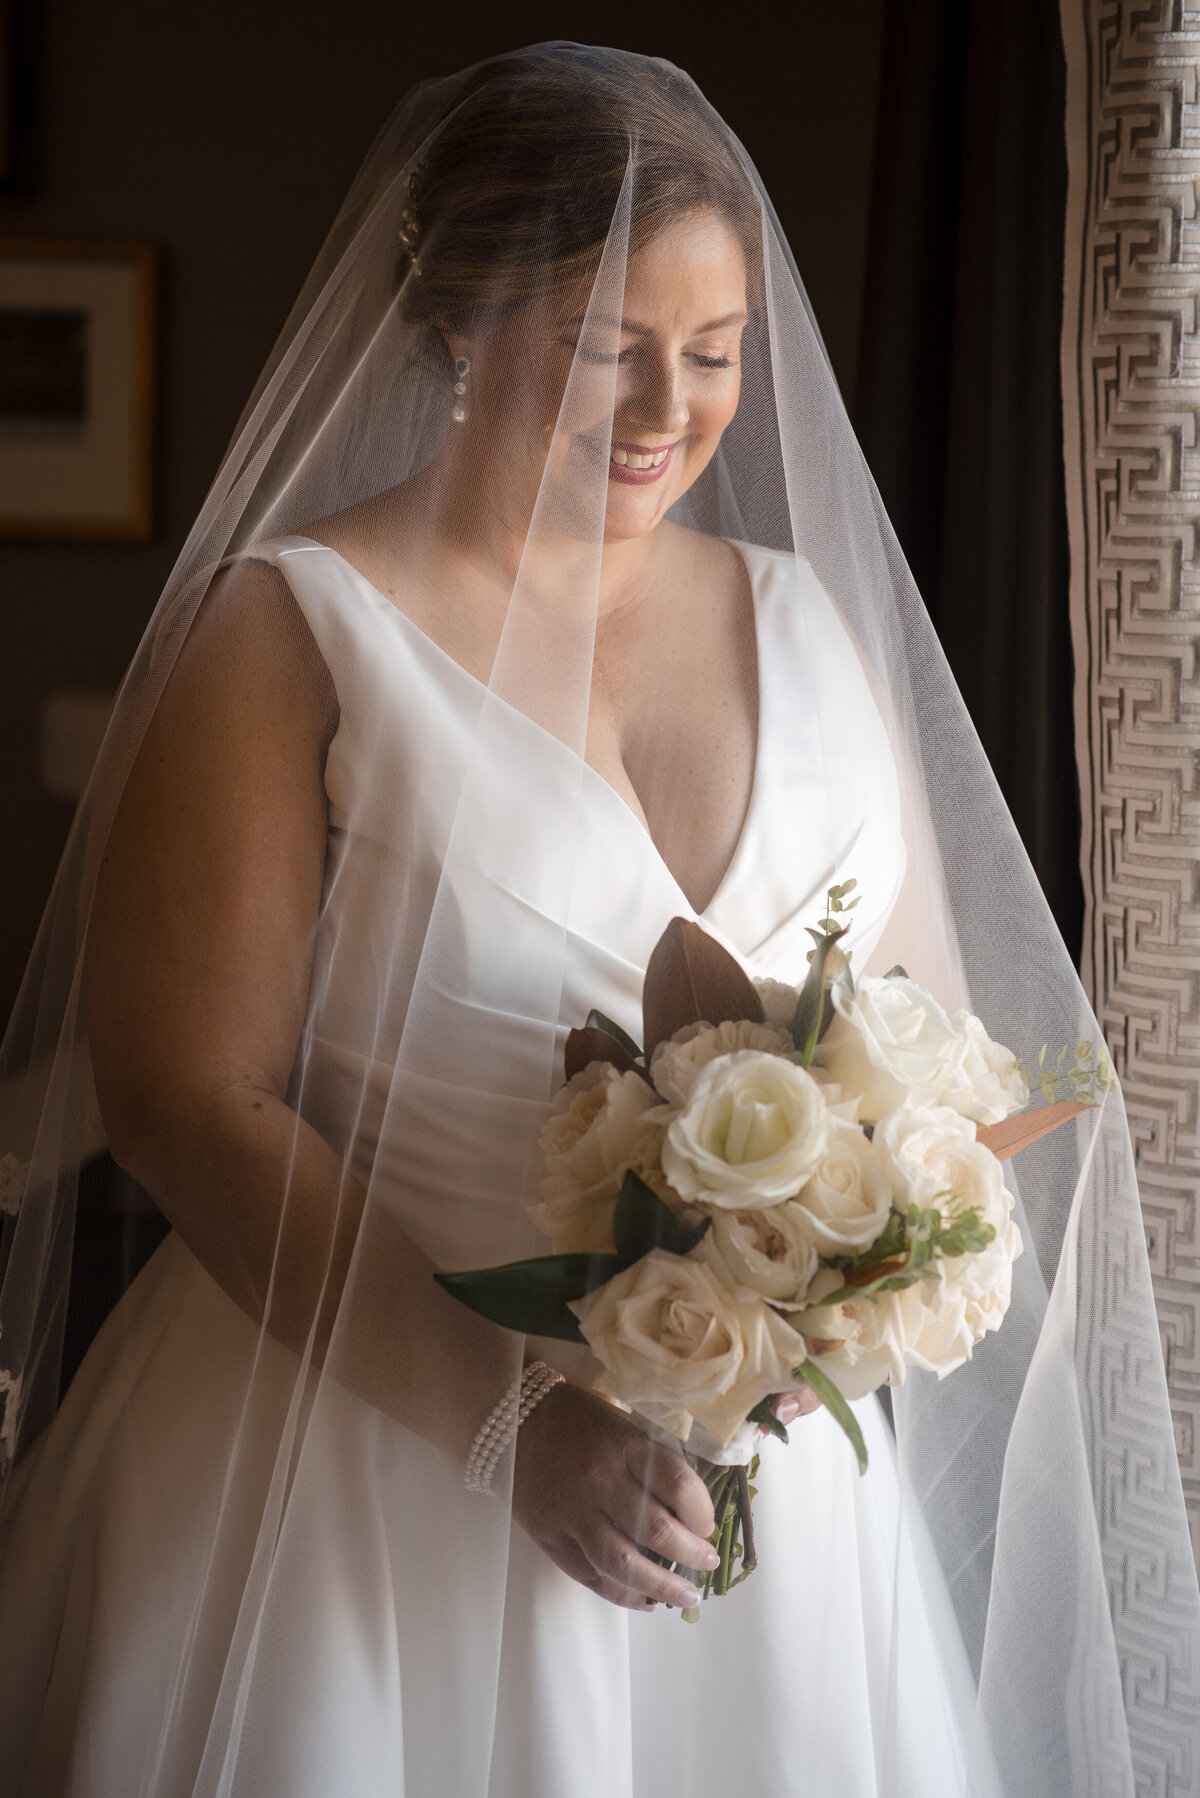 Bridal portrait where the bride has her veil over her face and she's looking down smiling at her flowers at the Ballantyne by Charlotte wedding photographer DeLong Photography